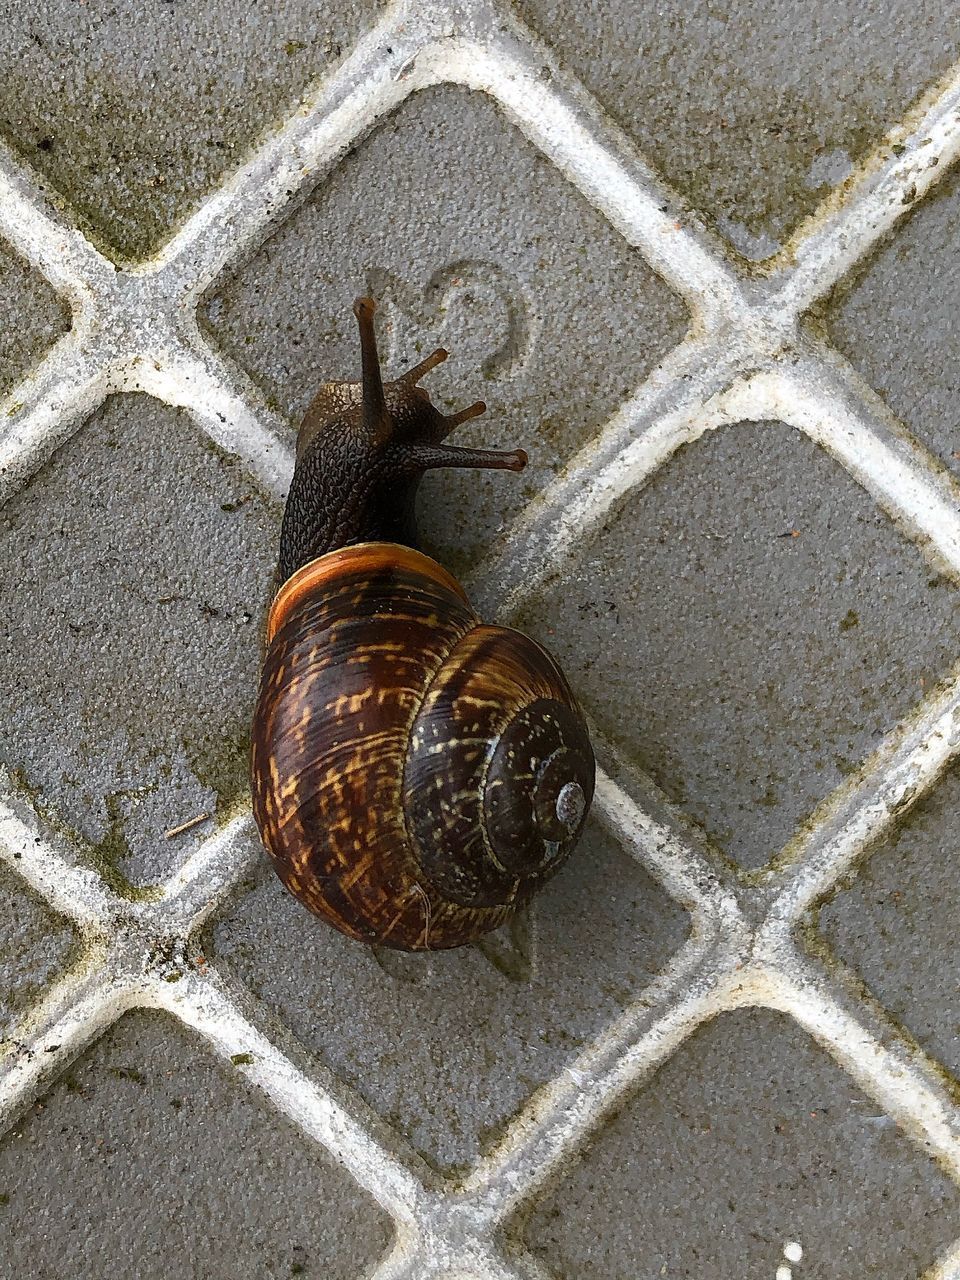 HIGH ANGLE VIEW OF SNAIL IN CONTAINER